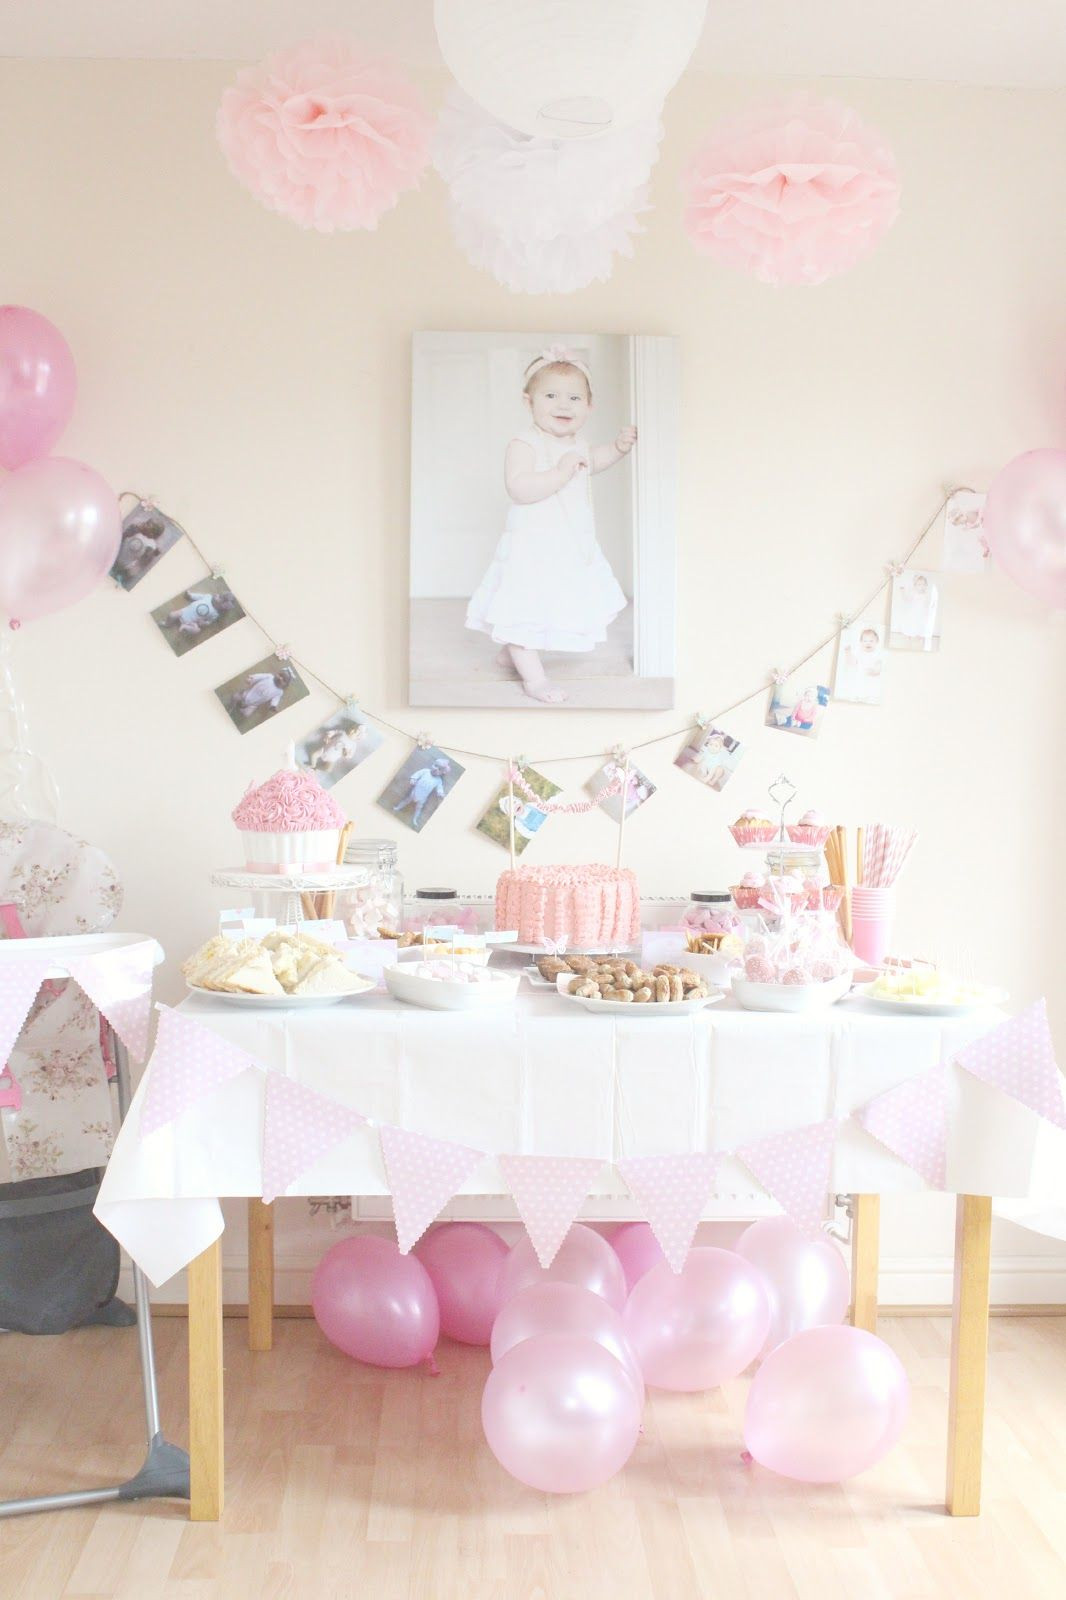 Birthday Decoration Ideas For Baby Girl
 First Birthday Party & Decor Vintage Princess Inspired